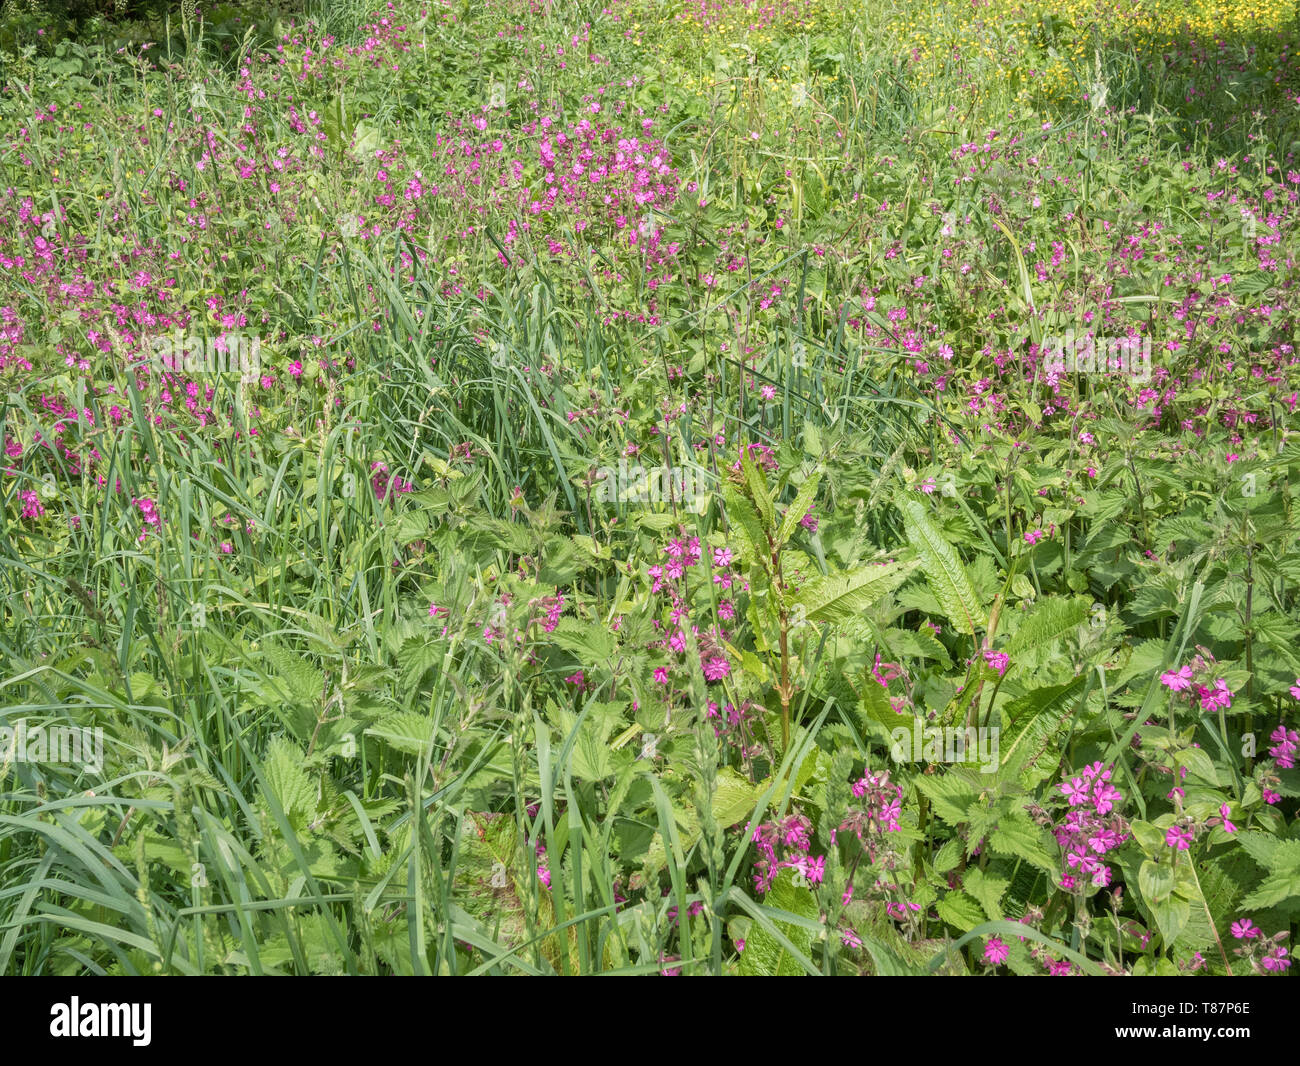 Mass of Red Campion / Silene dioica with Buttercups / Ranunculus repens, plus Docks. Stock Photo